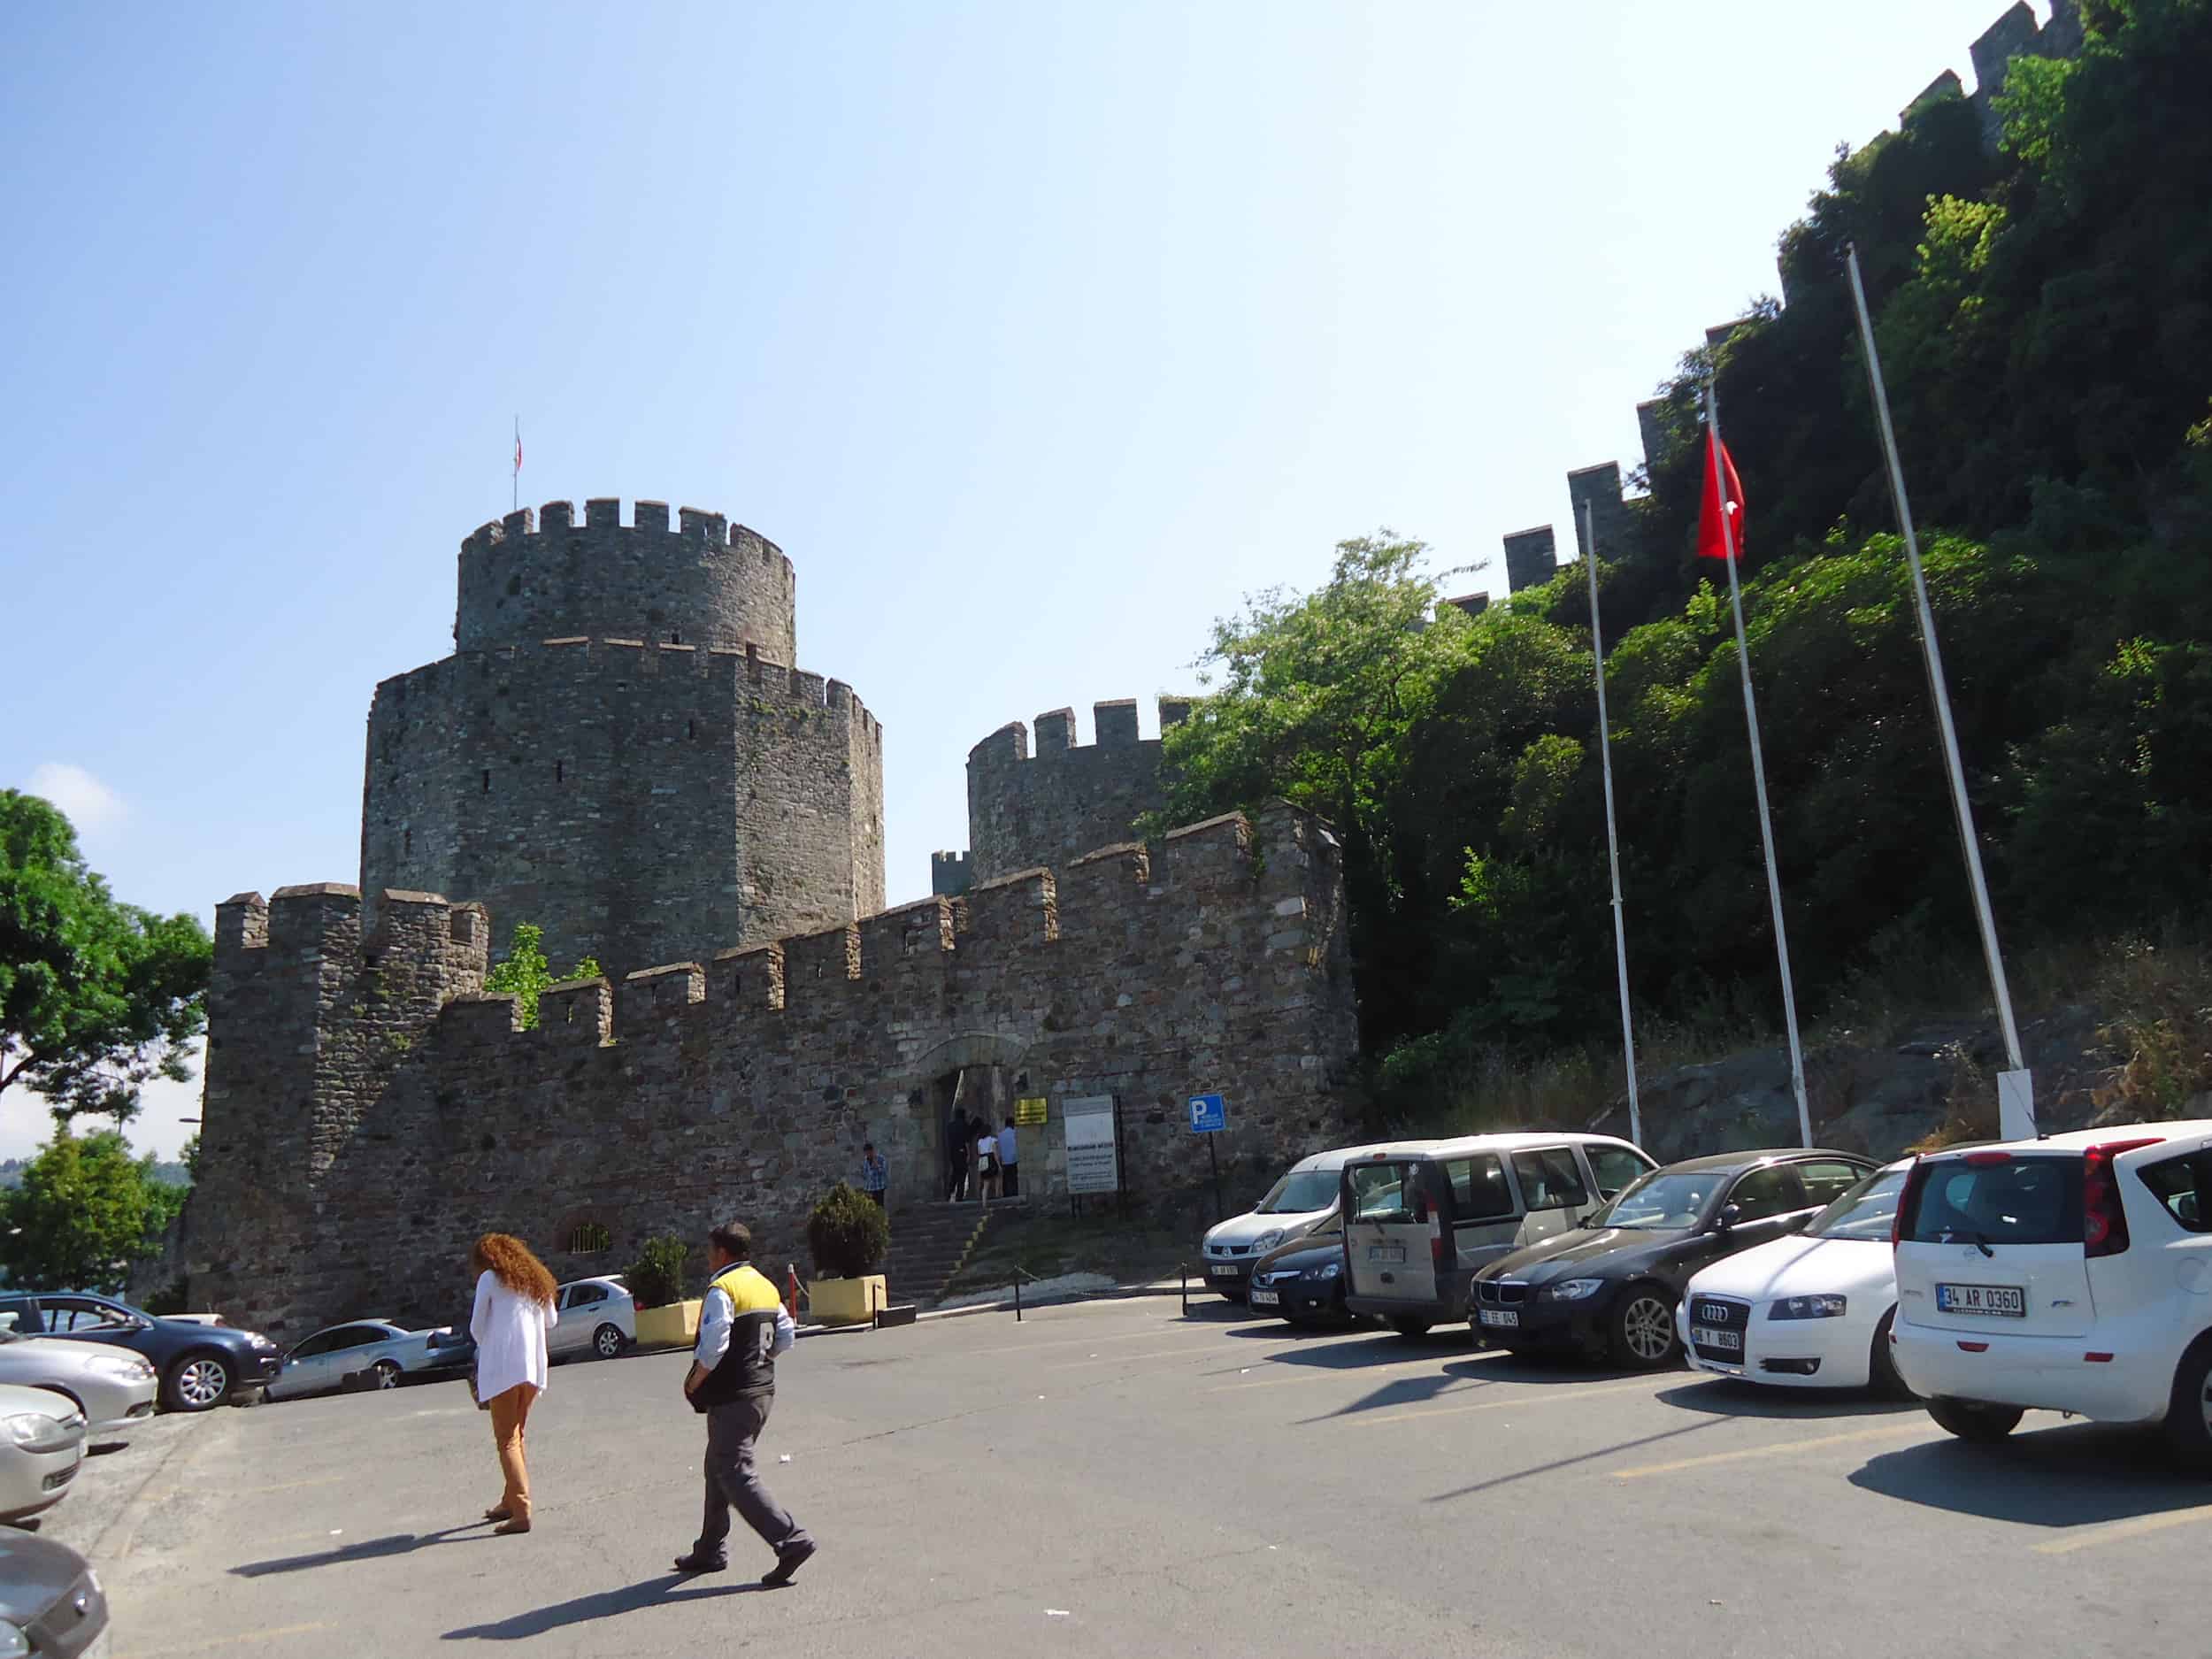 Entrance to Rumeli Fortress in Istanbul, Turkey